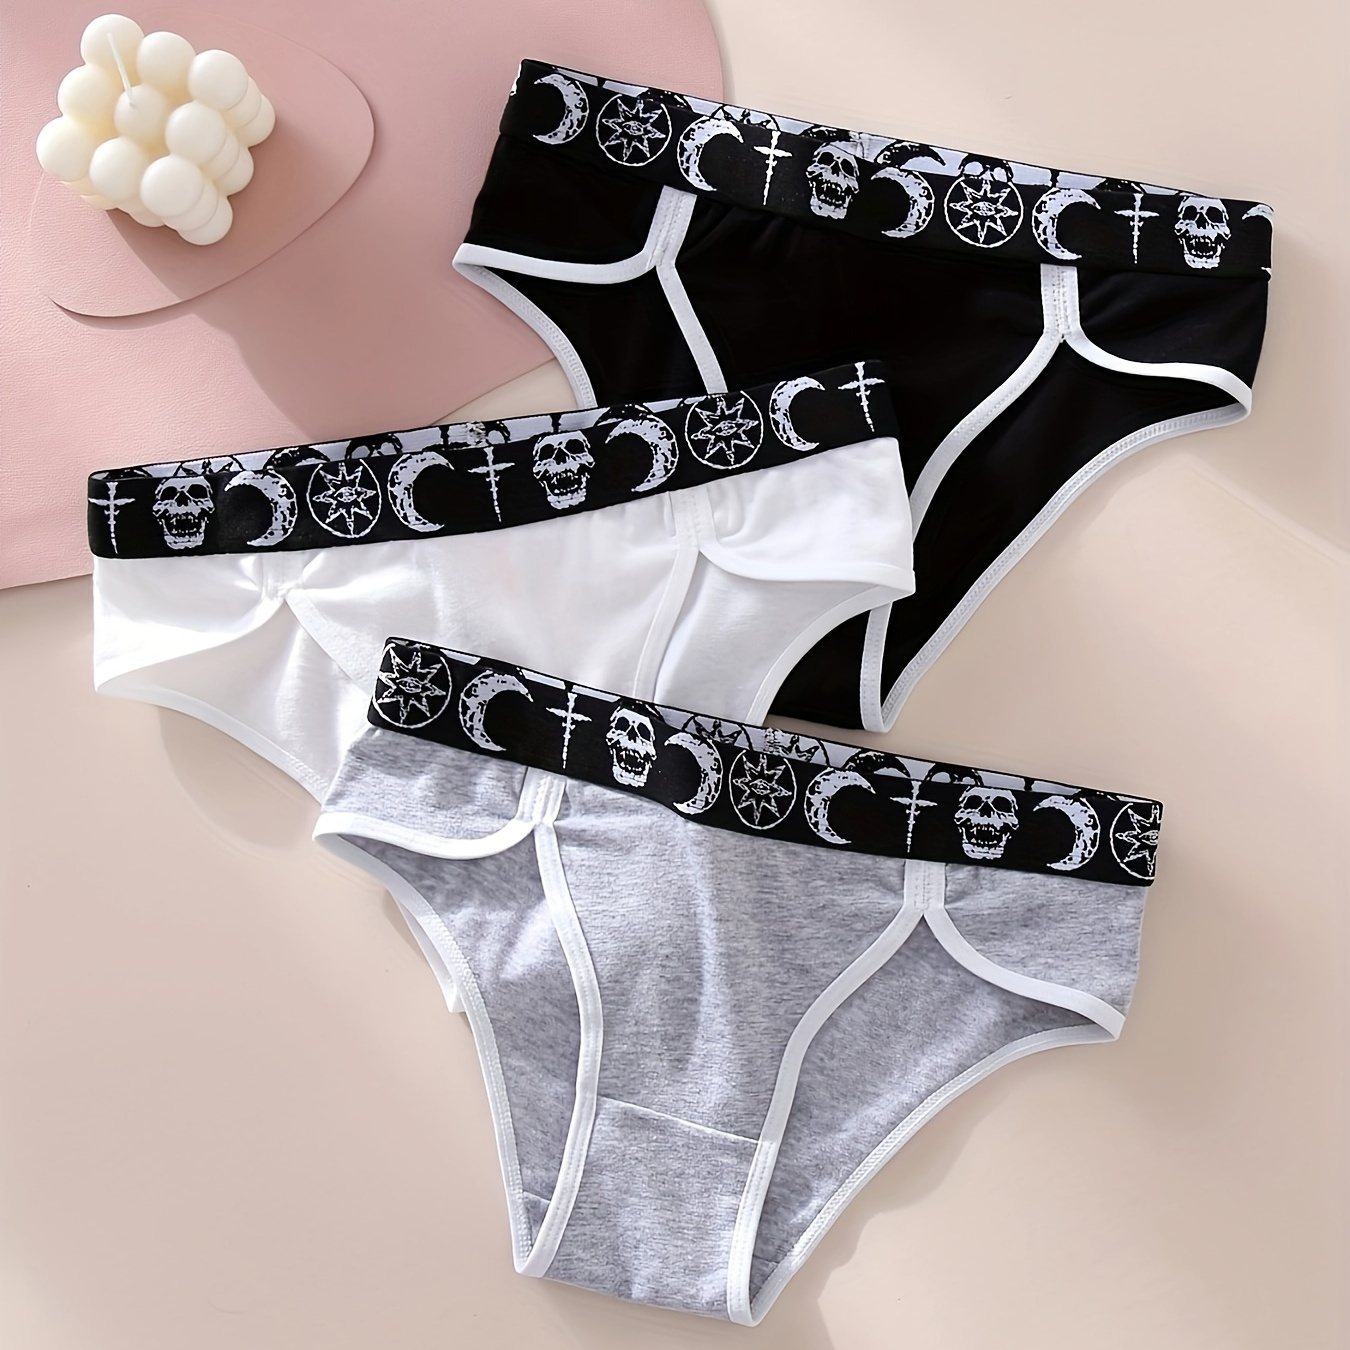 

3pcs Contrast Binding Briefs, Gothic Comfy Breathable Stretchy Intimates Panties, Women's Lingerie & Underwear